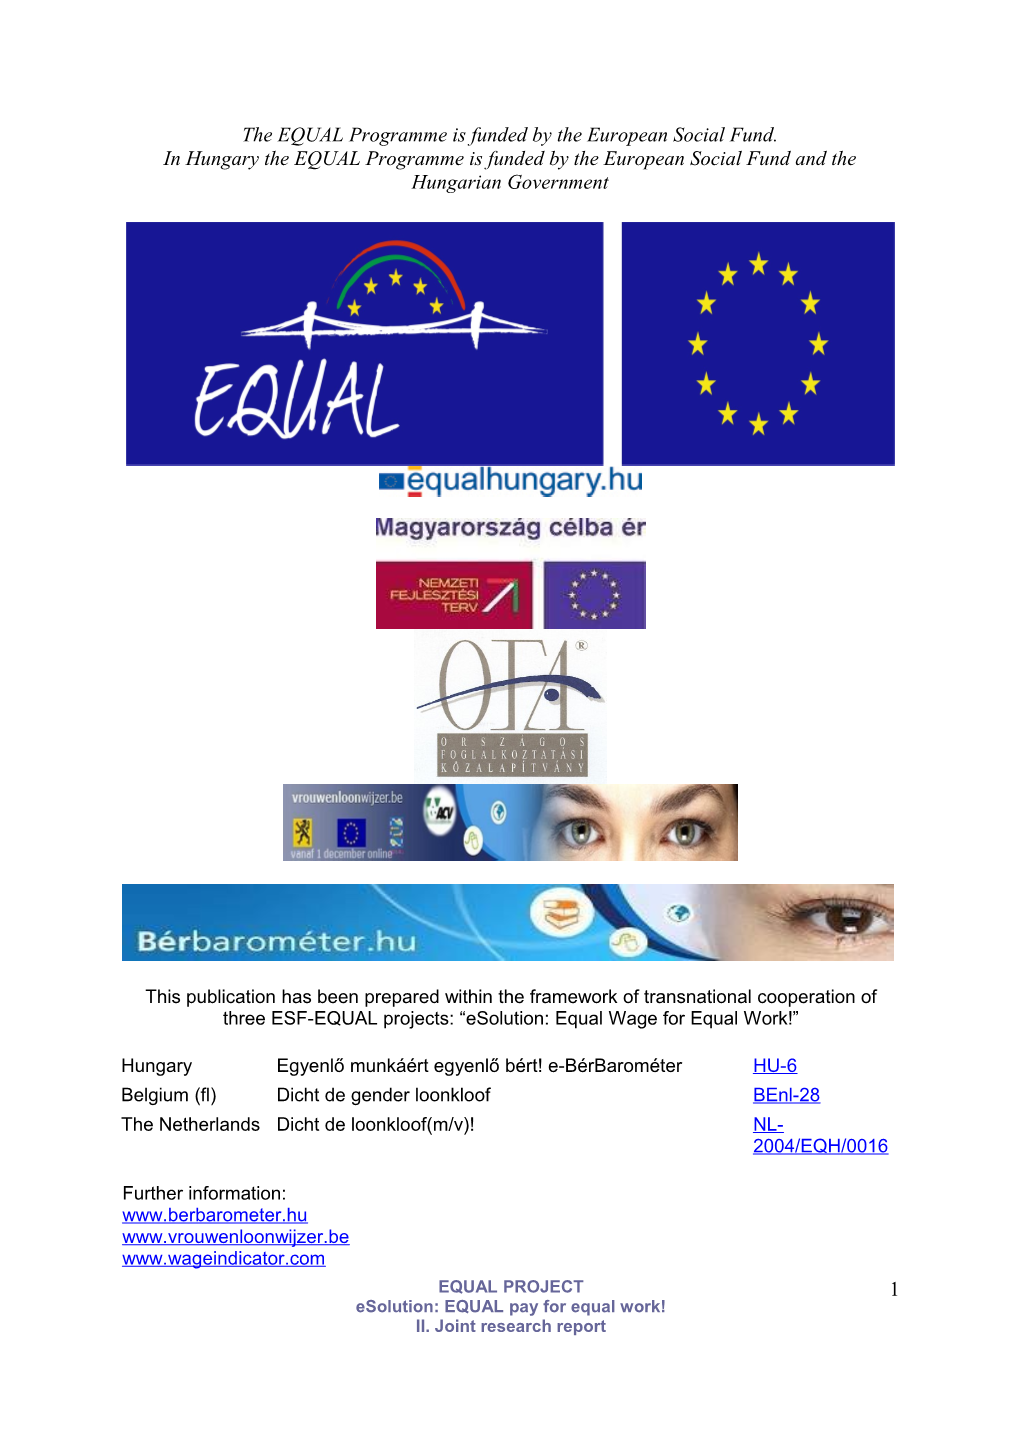 The EQUAL Programme Is Funded by the European Social Fund